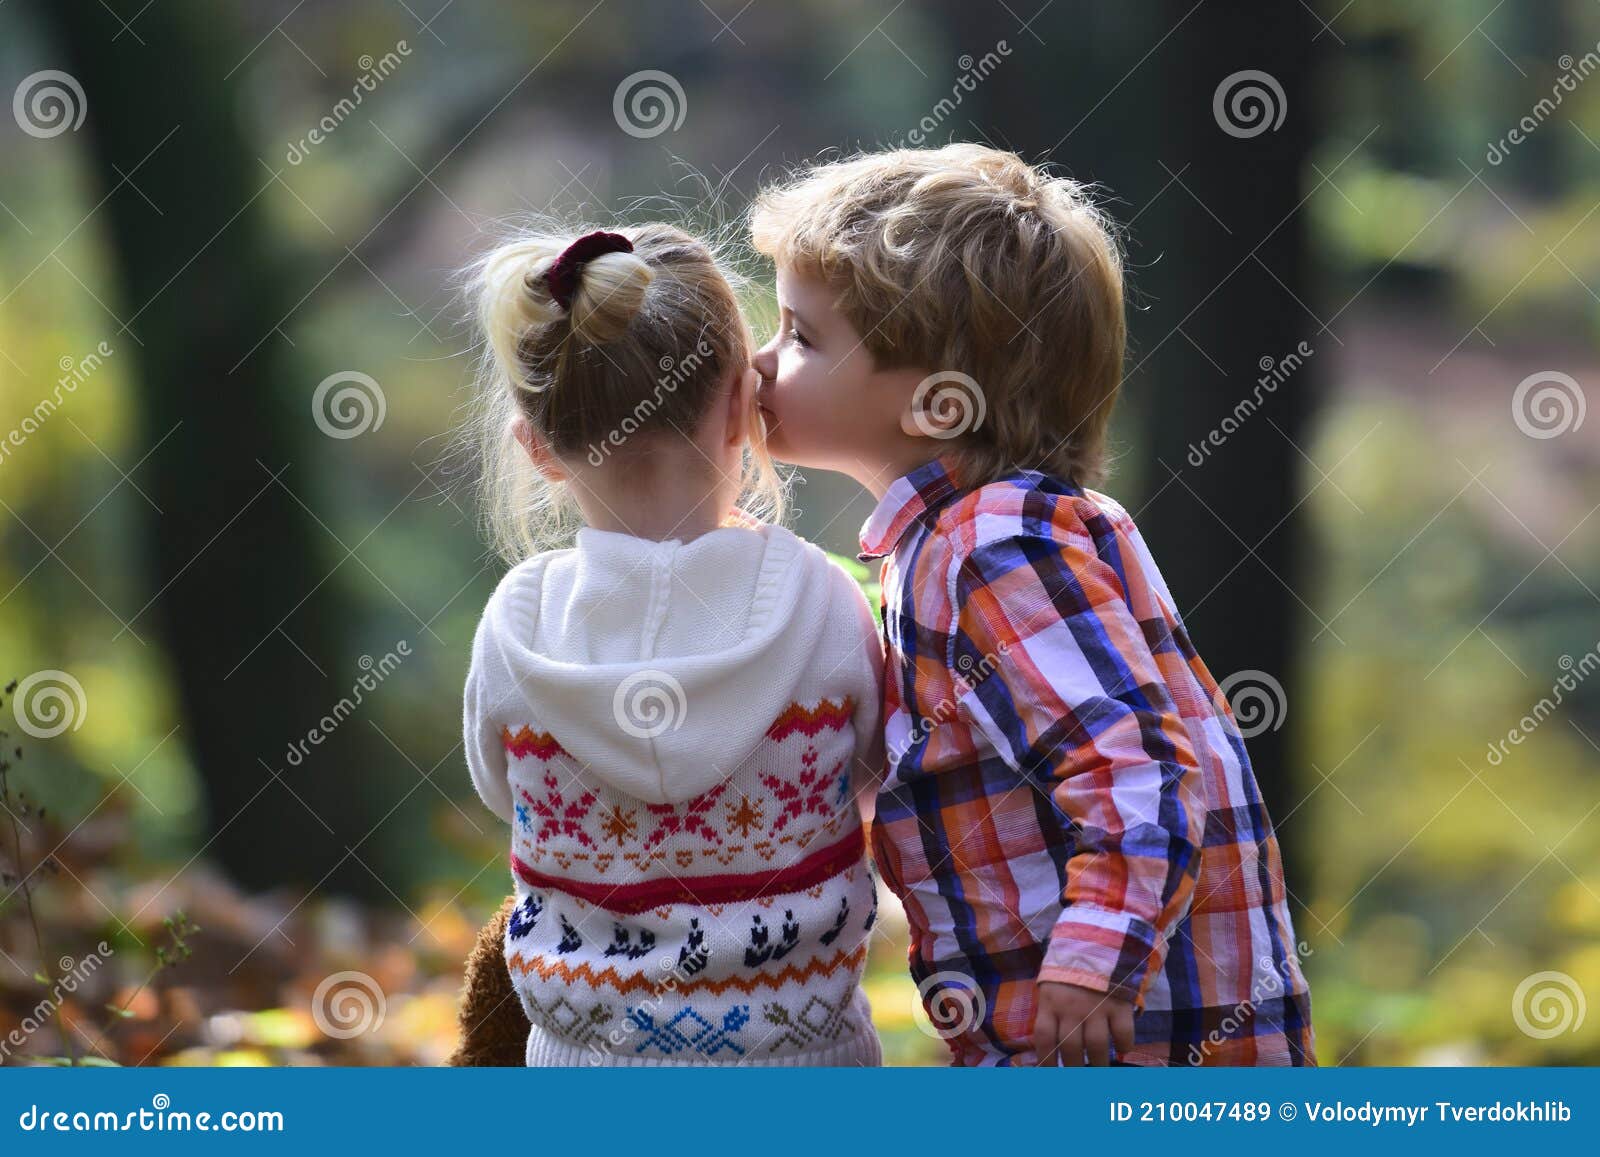 Little Boy Kiss Small Girl Friend in Autumn Forest. Brother Kiss ...